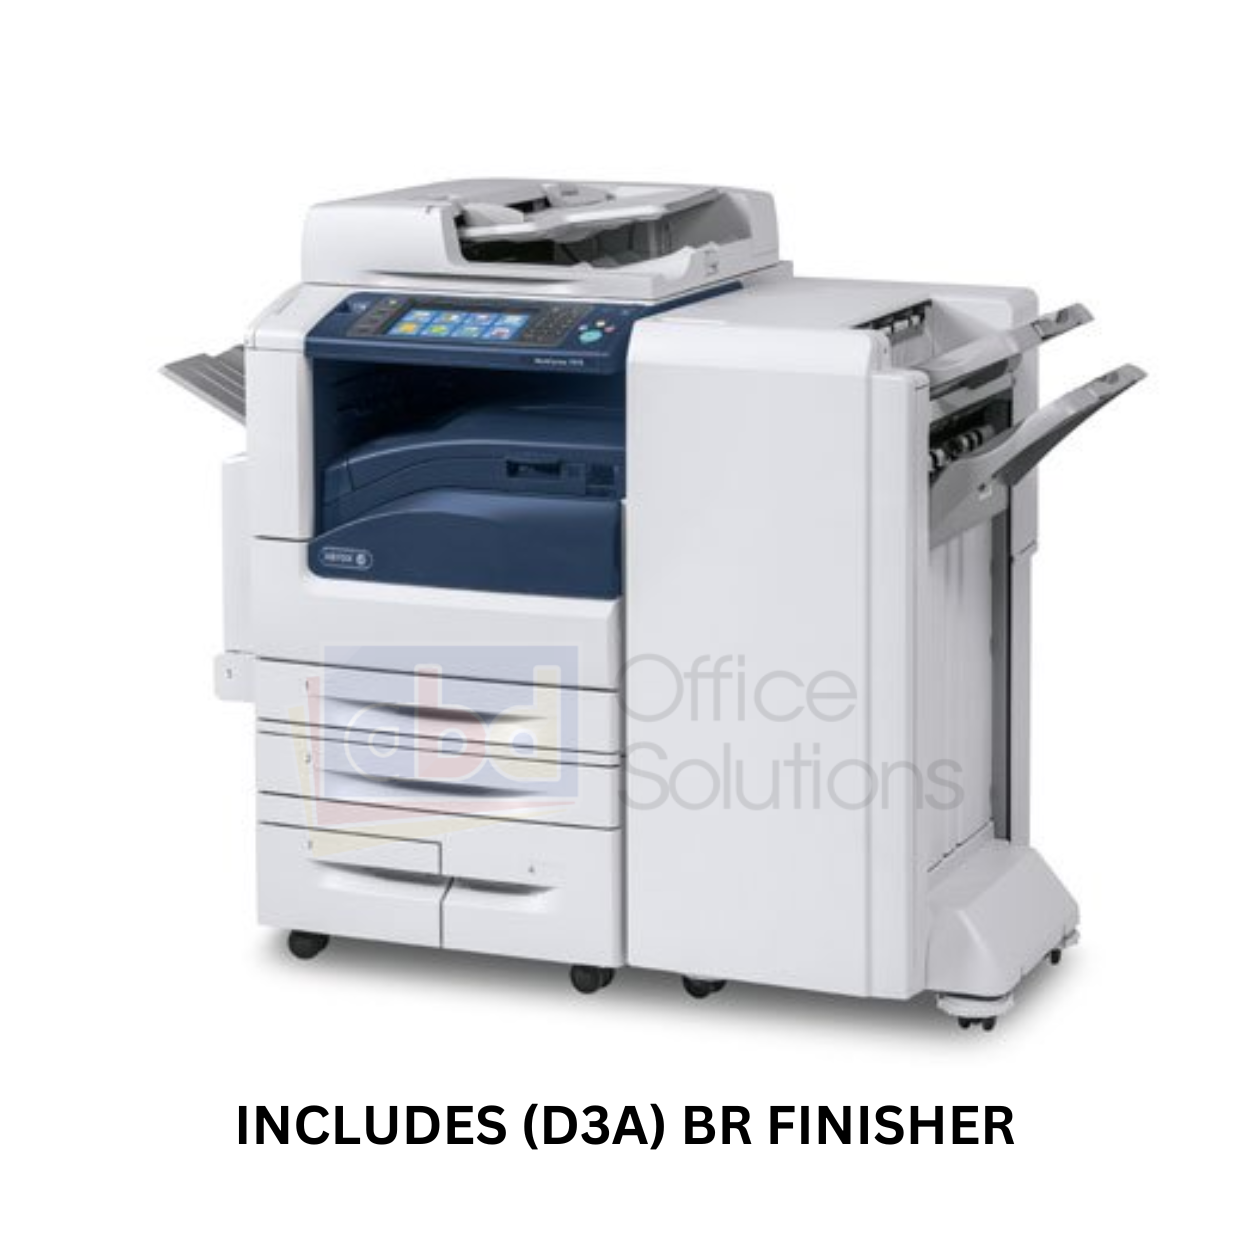 Xerox WorkCentre 7970 A3 Color Copier Printer Scanner Fax MFP 70PPM BR Finisher - $4,279.77